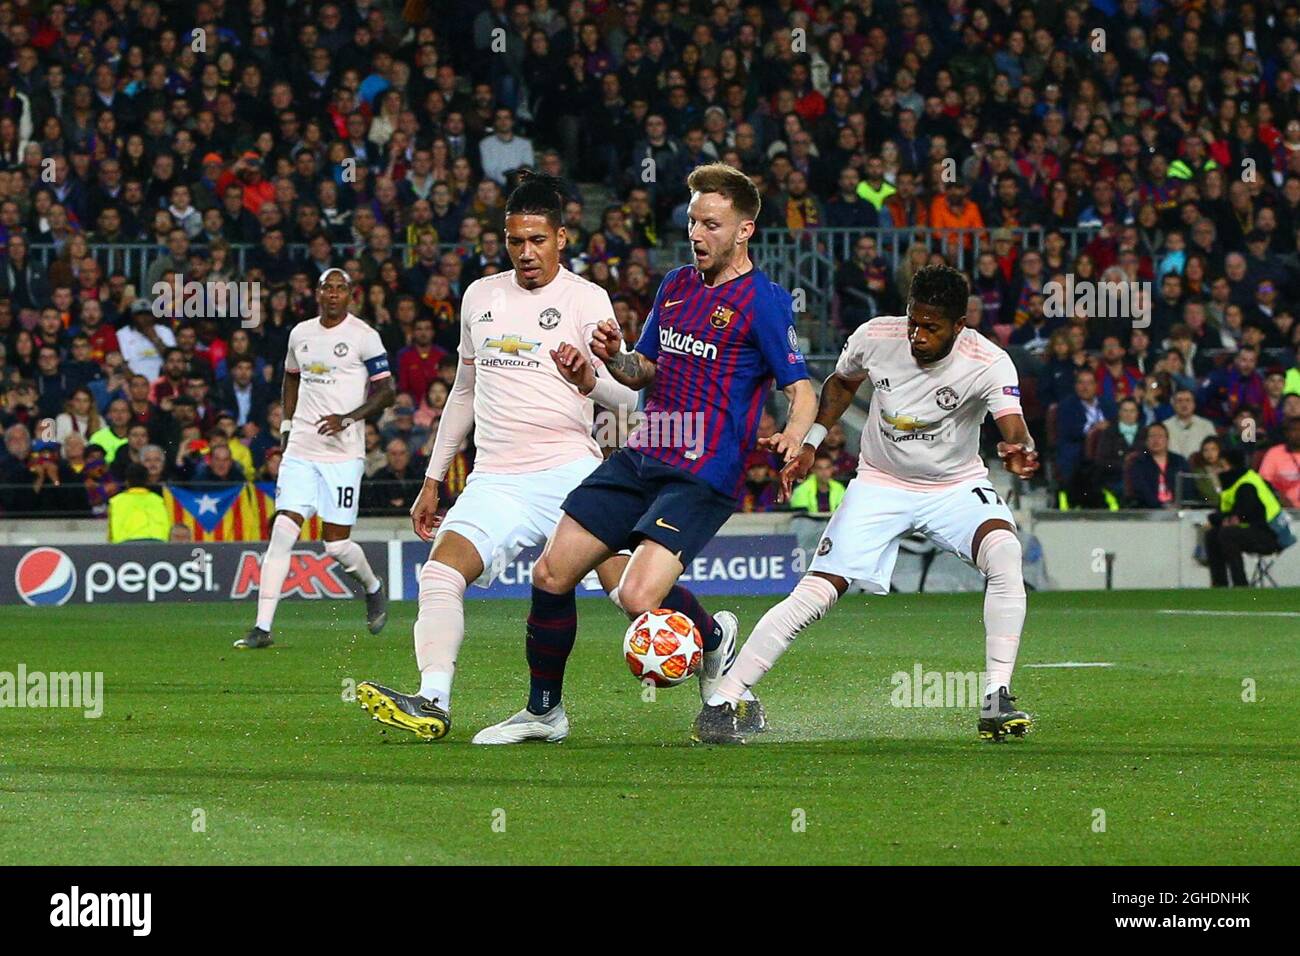 Ivan Rakitic of FC Barcelona goes down under the challenge of Fred of Manchester United which is reviewed to VAR for a penalty review during the UEFA Champions League match at Camp Nou, Barcelona. Picture date: 16th April 2019. Picture credit should read: Craig Mercer/Sportimage via PA Images Stock Photo